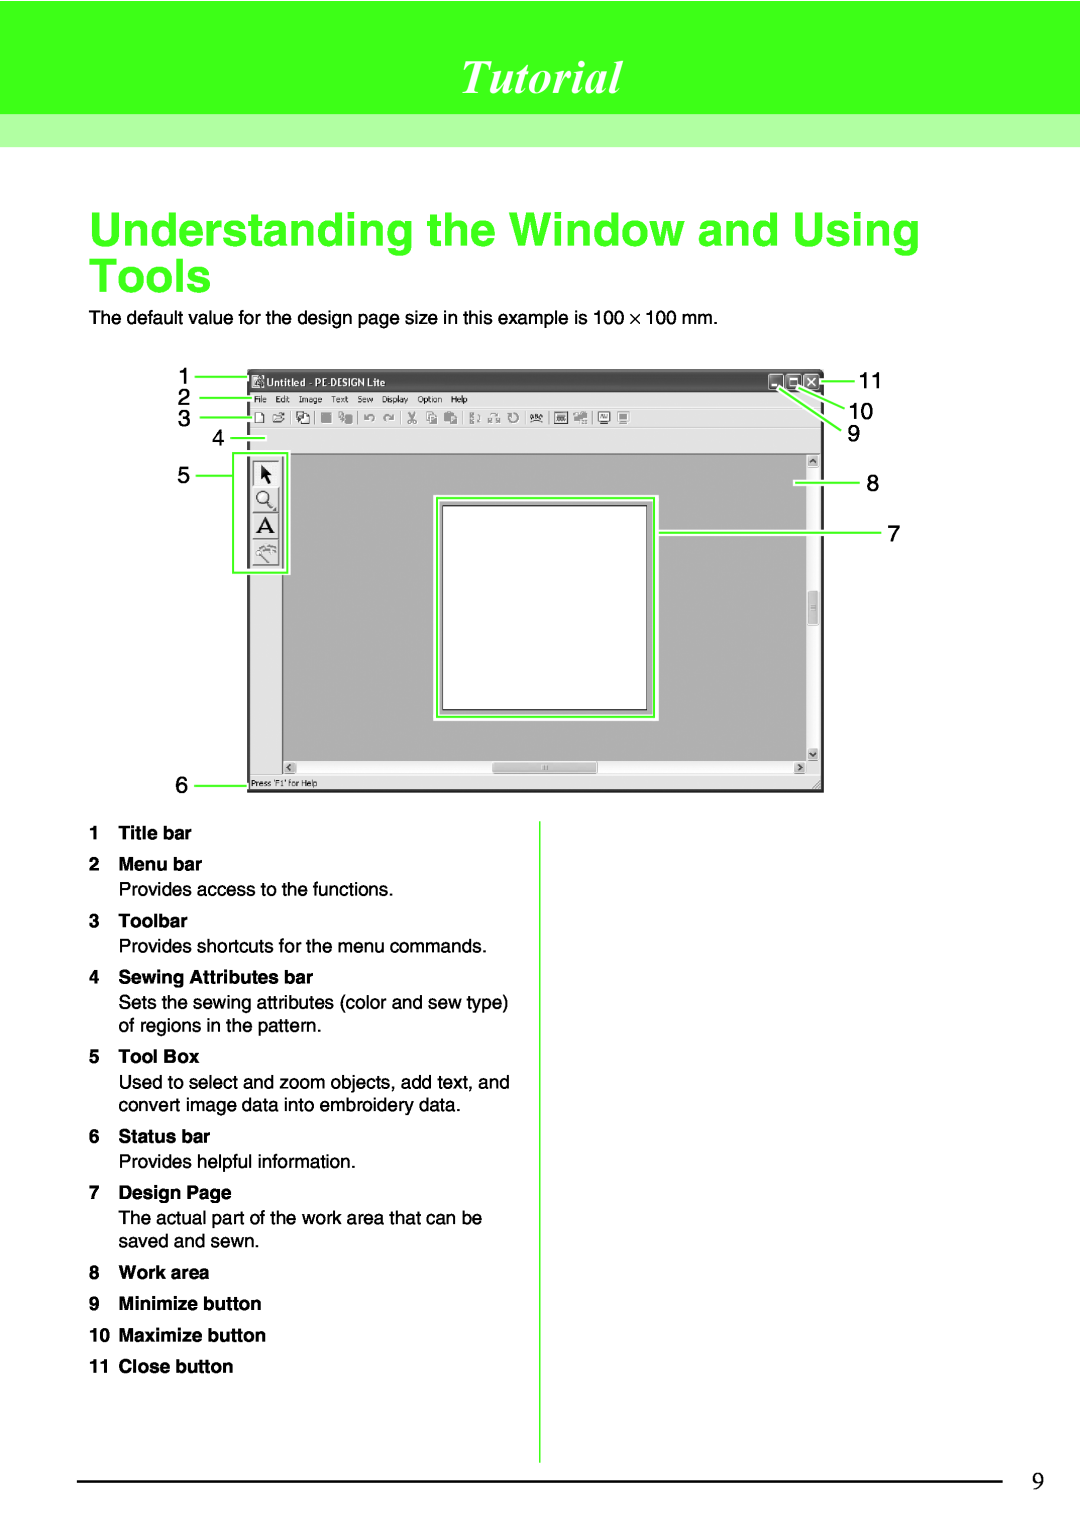 Brother Brother USB Writer Tutorial, Understanding the Window and Using Tools, Title bar 2 Menu bar, Toolbar, Tool Box 